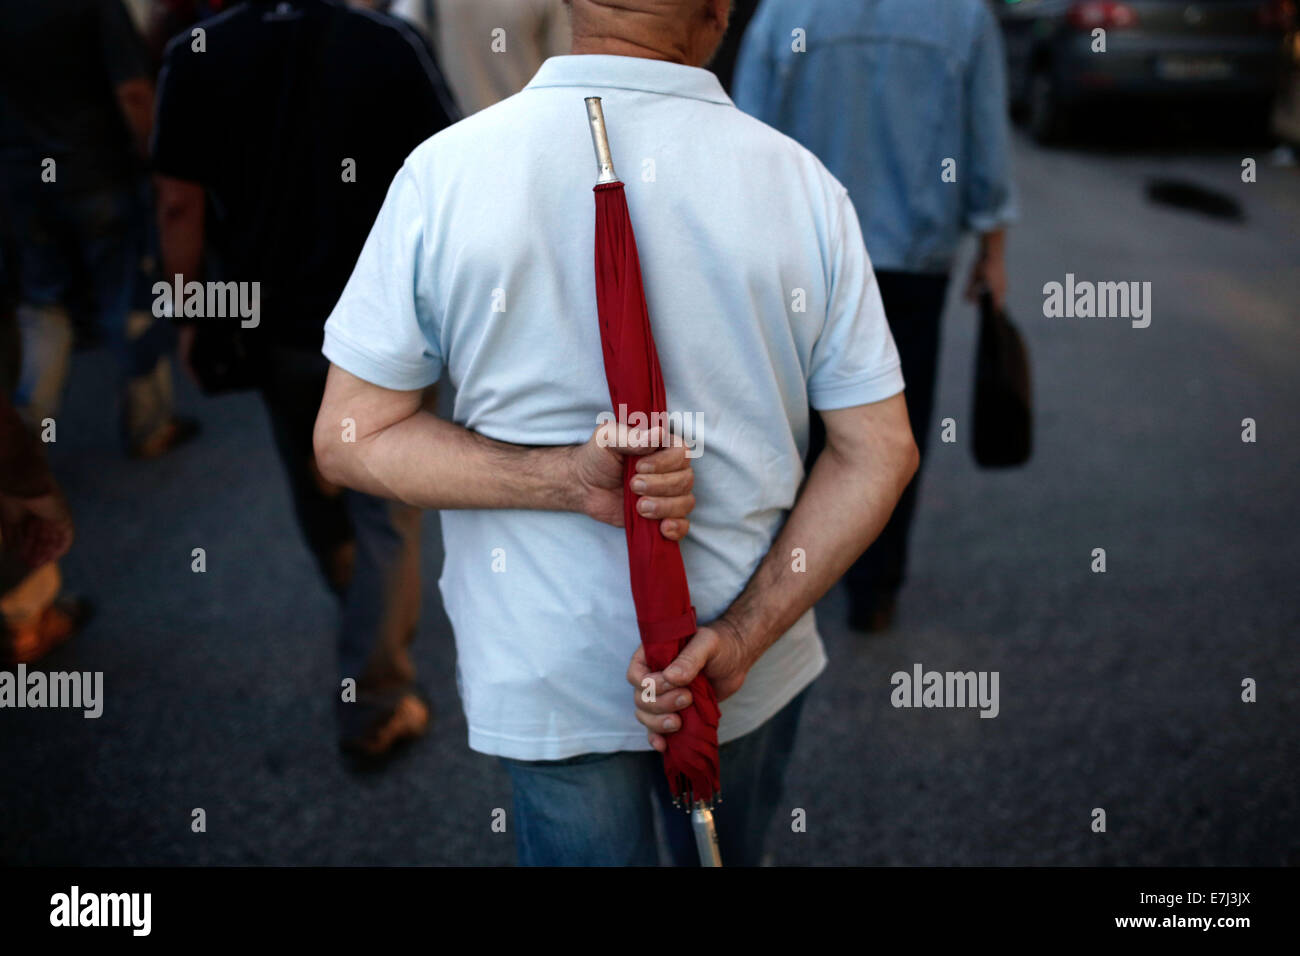 Page 2 - 45 Year Old High Resolution Stock Photography and Images - Alamy